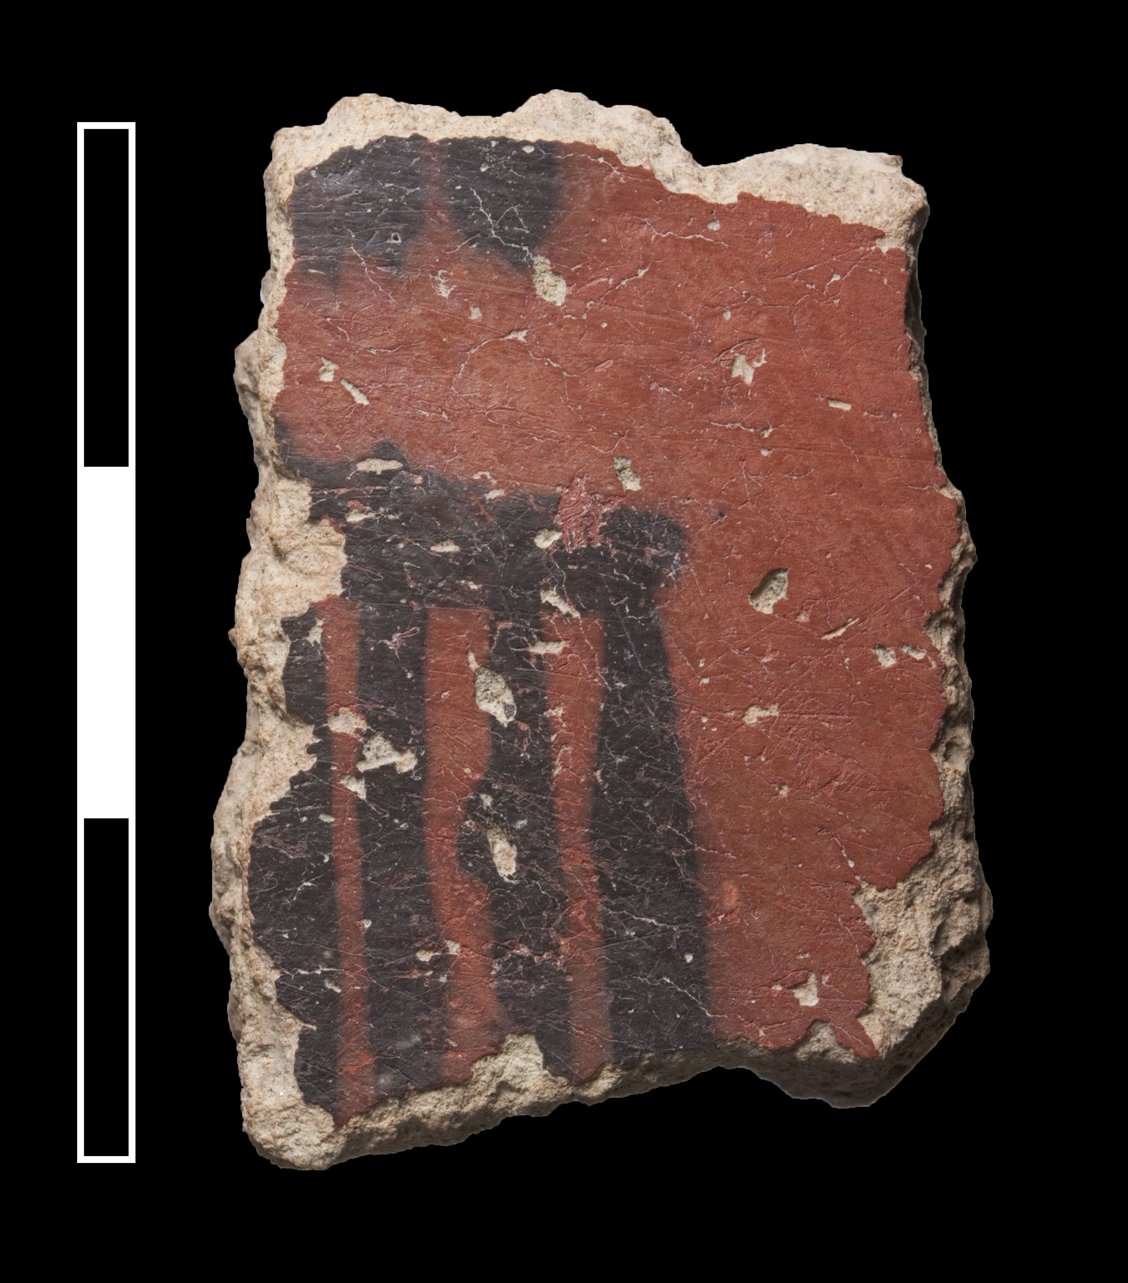 A sherd of Neolithic Black on Red ware. This ware occurs in small quantities at Monjukli Depe and is mostly intrusive in later (Meana Horizon) contexts. 